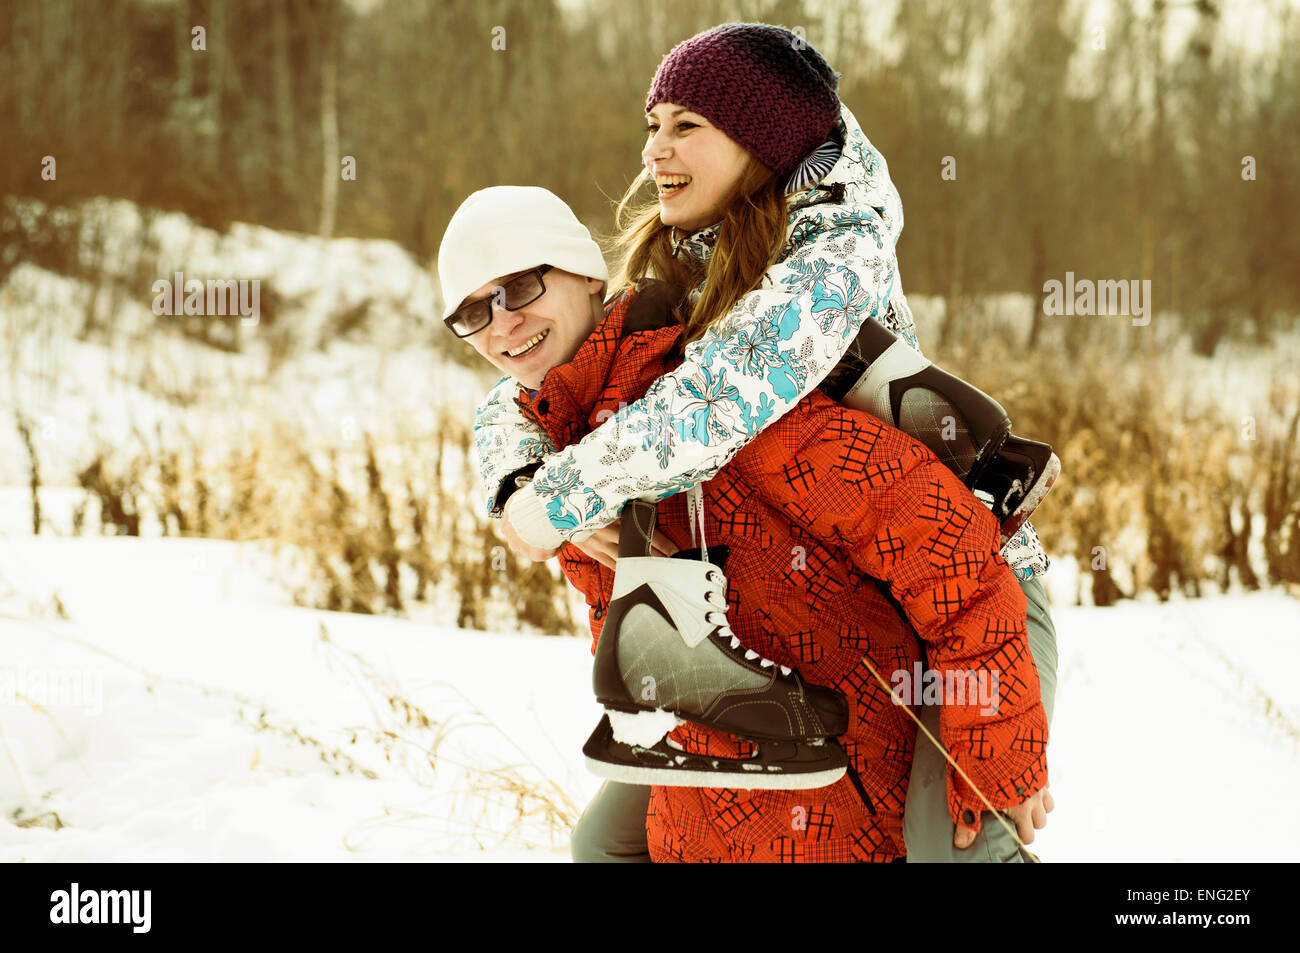 Caucasian couple carrying ice skates in snowy field Stock Photo